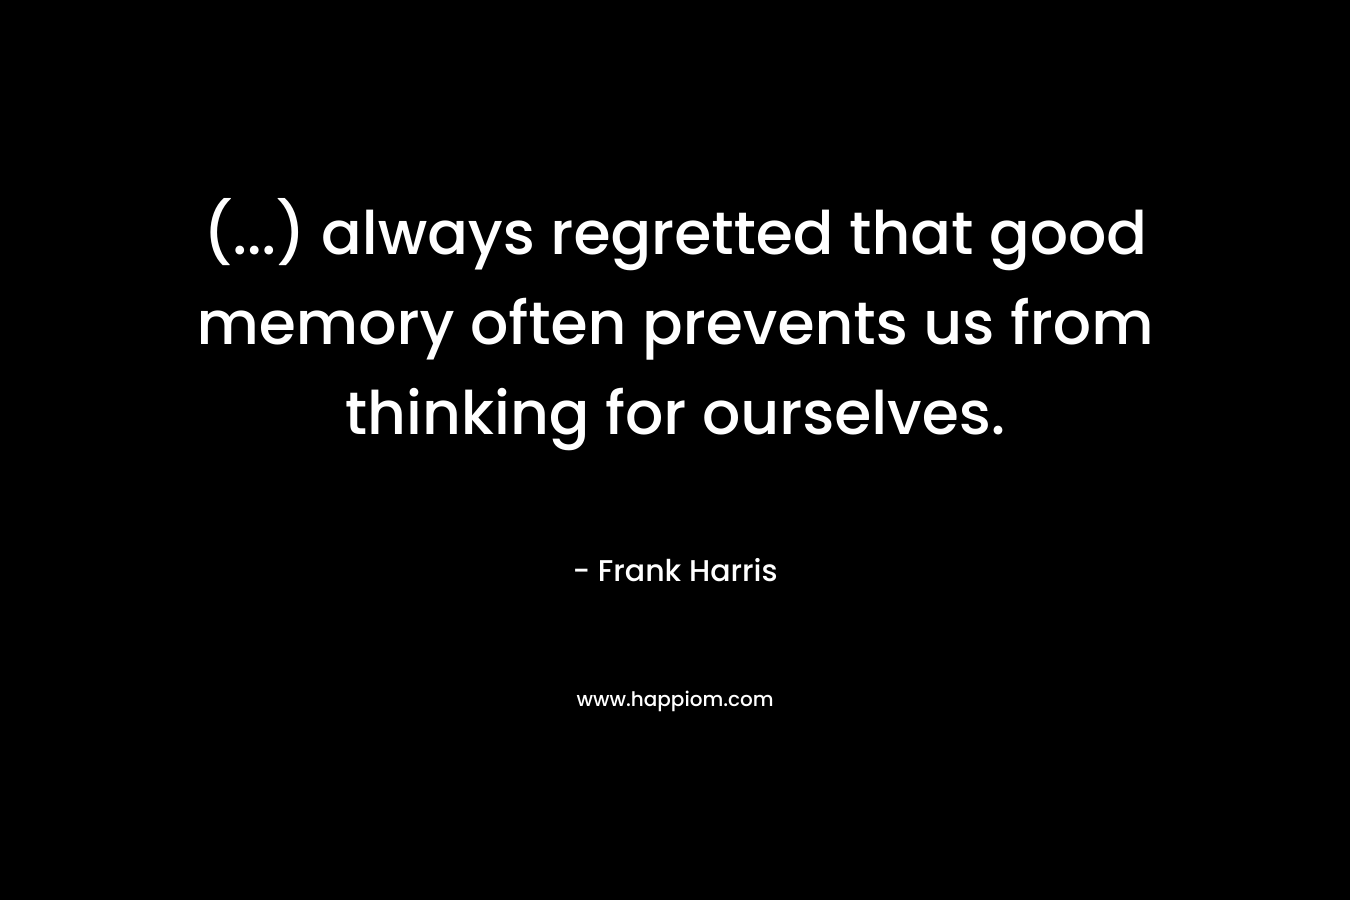 (…) always regretted that good memory often prevents us from thinking for ourselves. – Frank Harris